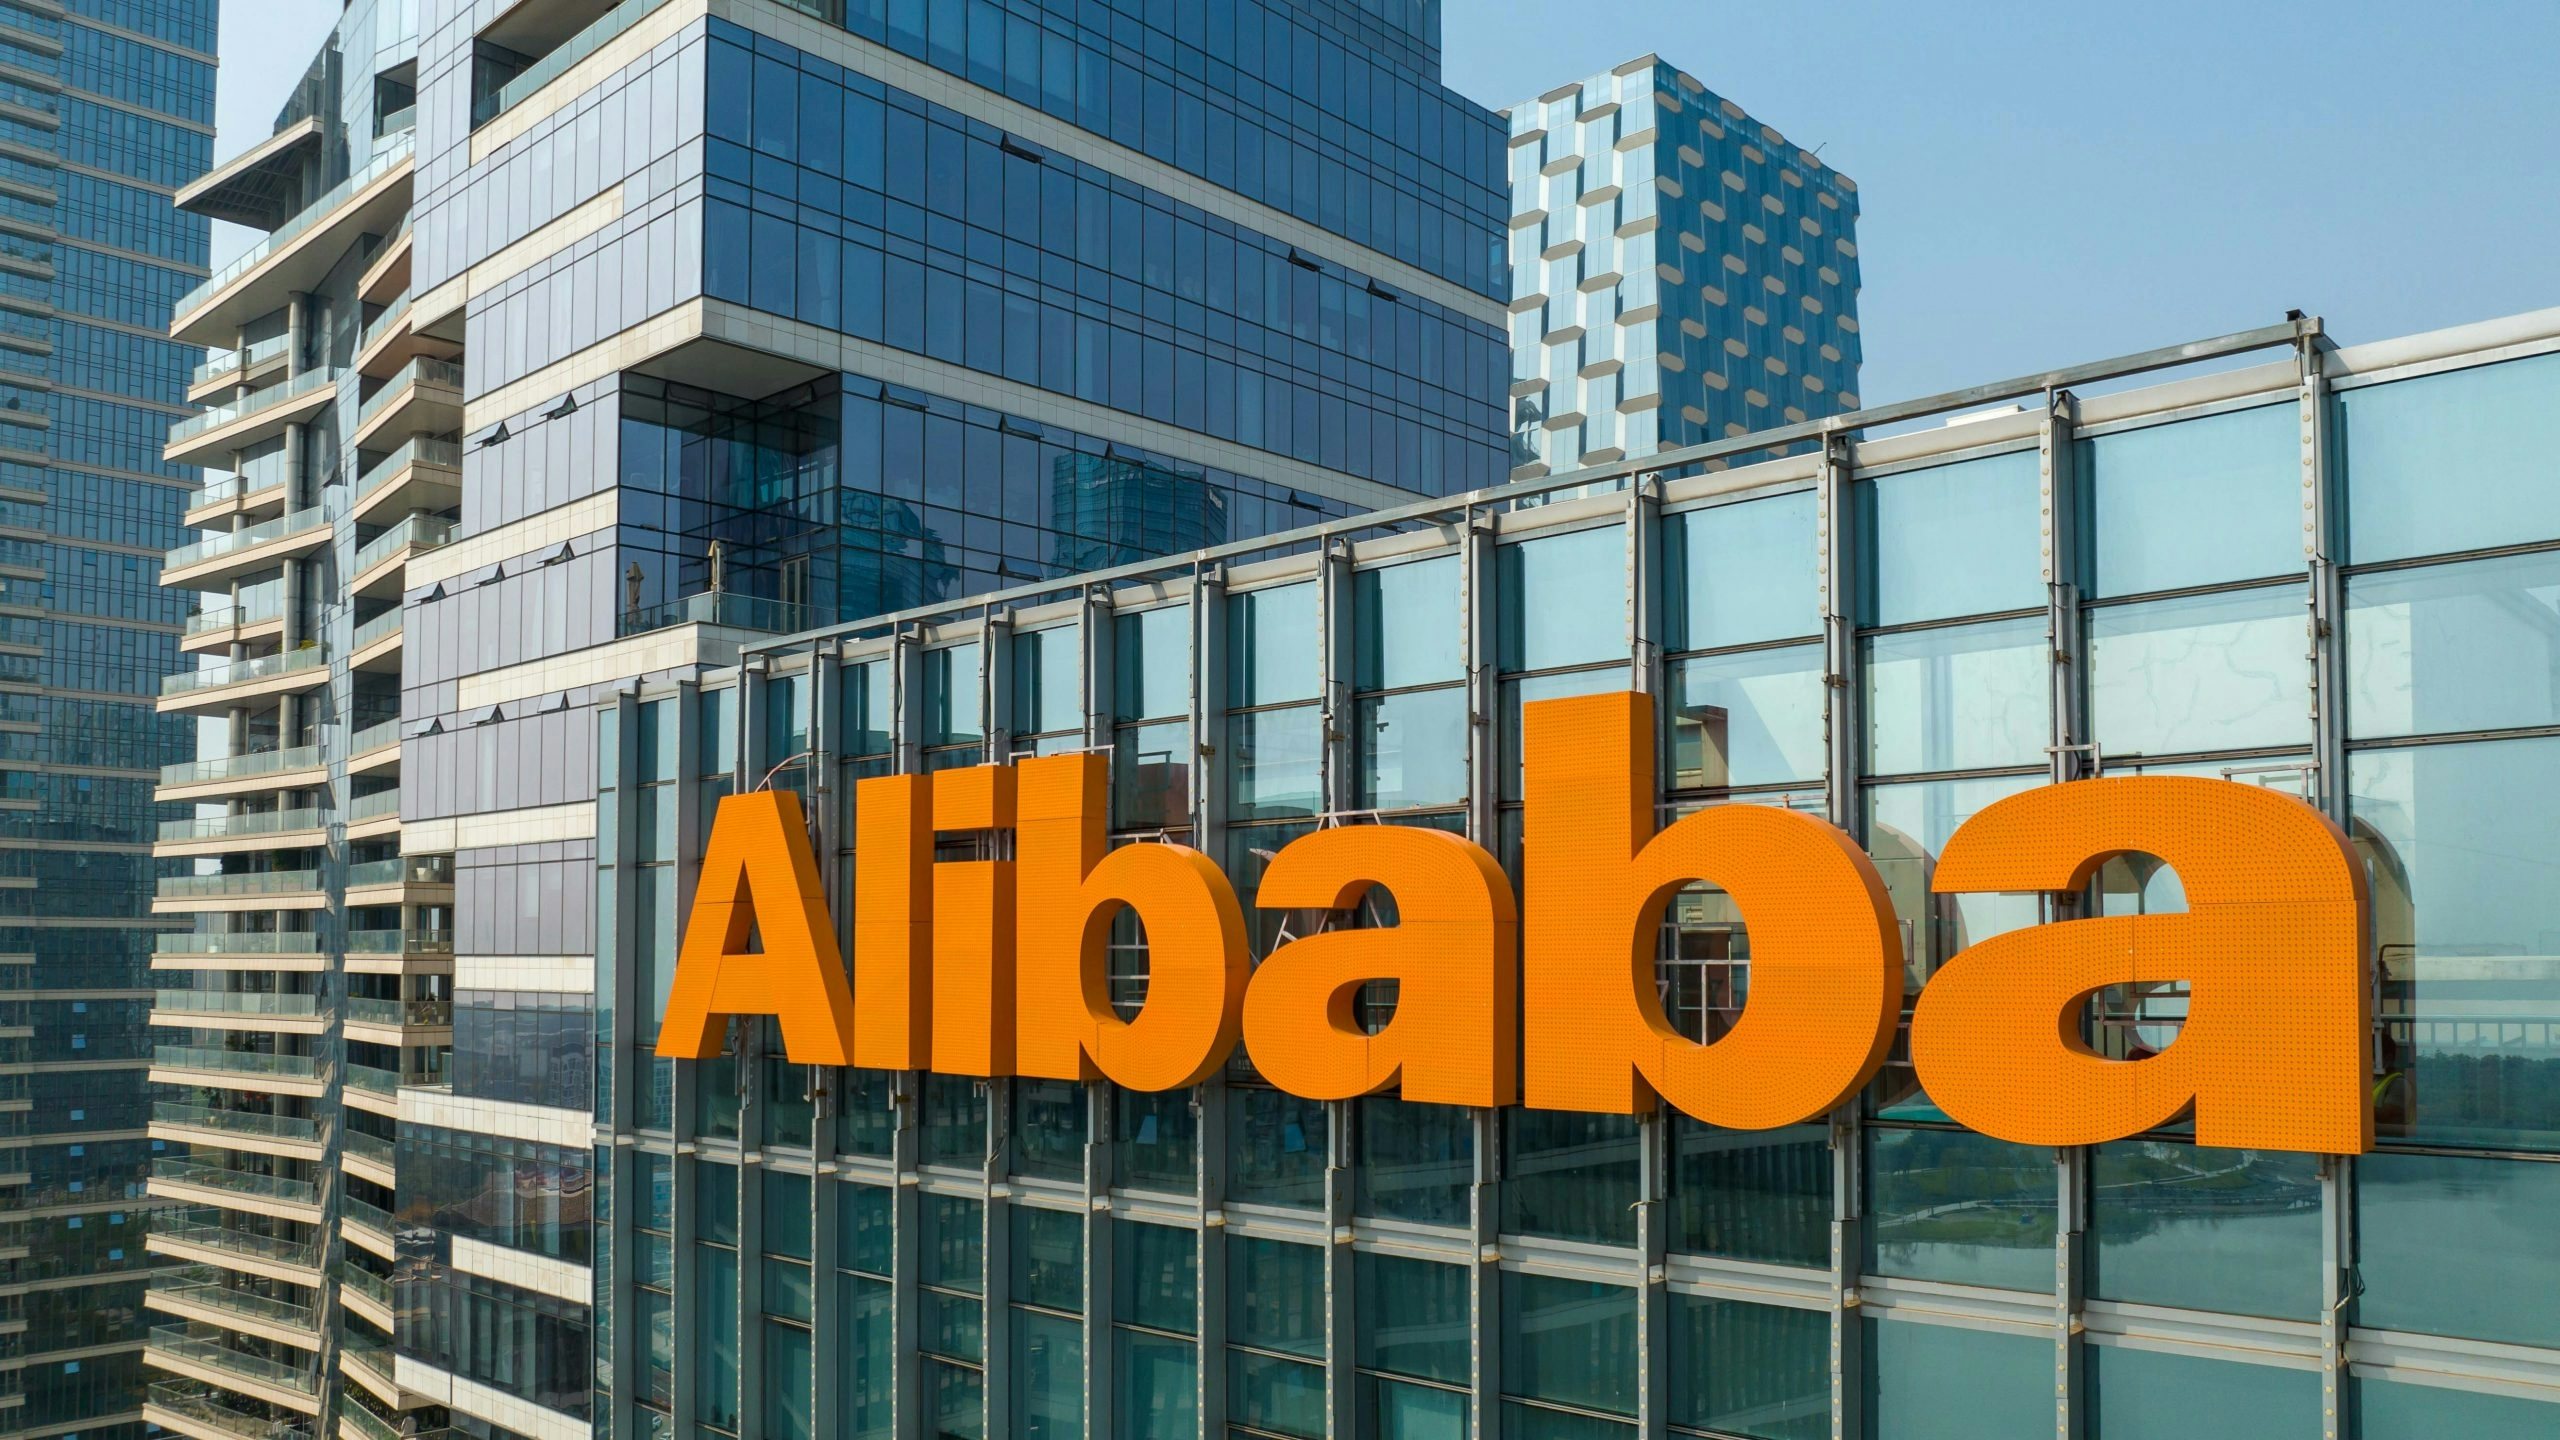 Jack Ma’s sprawling conglomerate Alibaba just announced it’s splitting into six entities, the largest restructuring in its 24-year history. Photo: Shutterstock